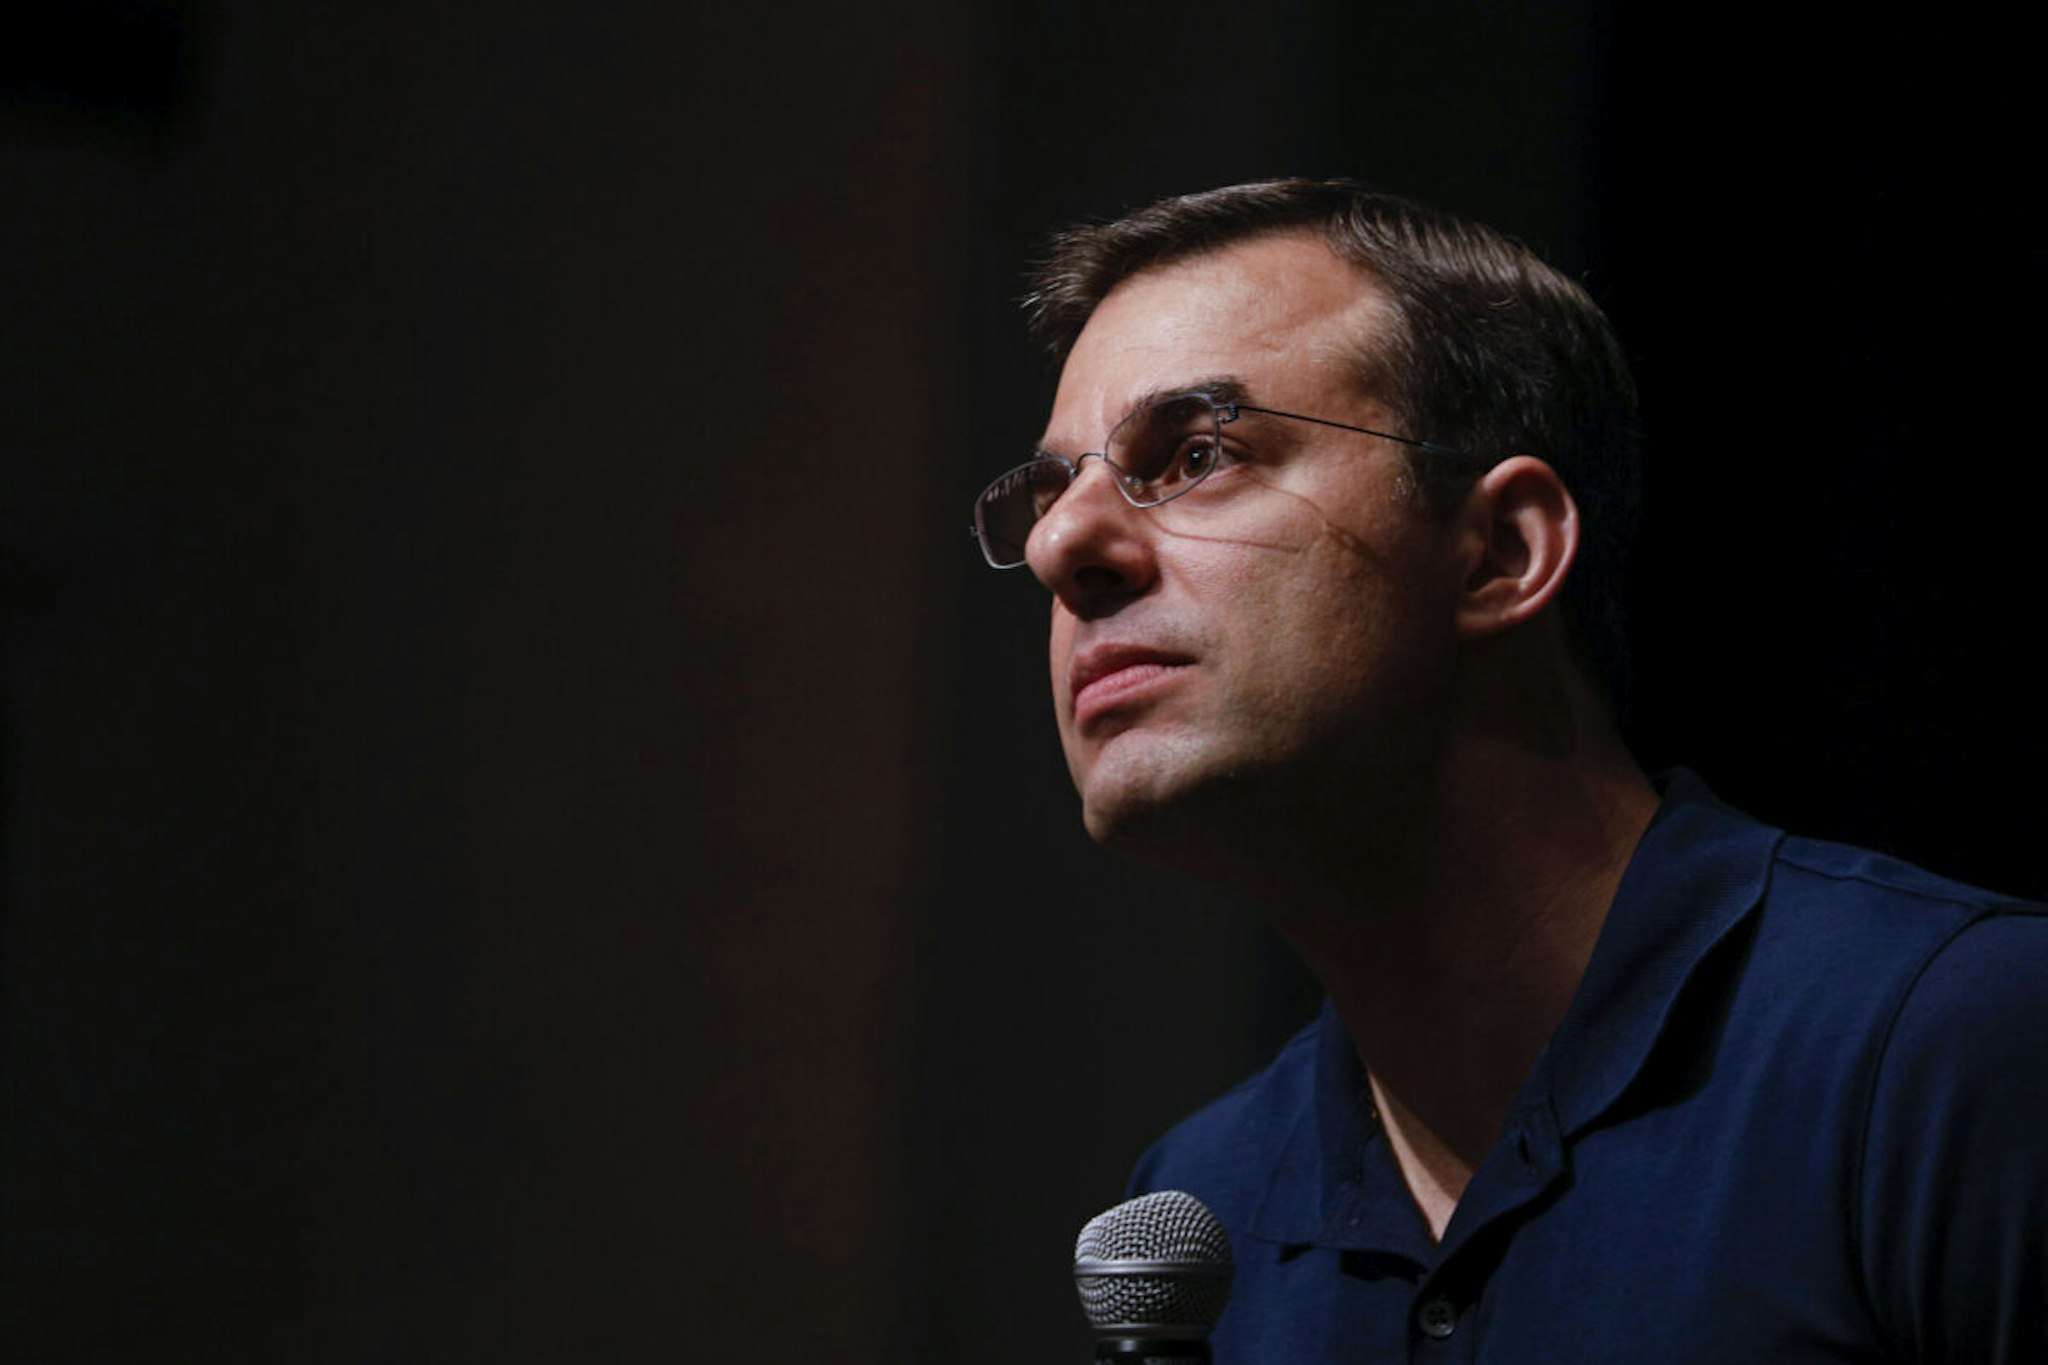 GRAND RAPIDS, MI - MAY 28: U.S. Rep. Justin Amash (R-MI) holds a Town Hall Meeting on May 28, 2019 in Grand Rapids, Michigan. Amash was the first Republican member of Congress to say that President Donald Trump engaged in impeachable conduct.